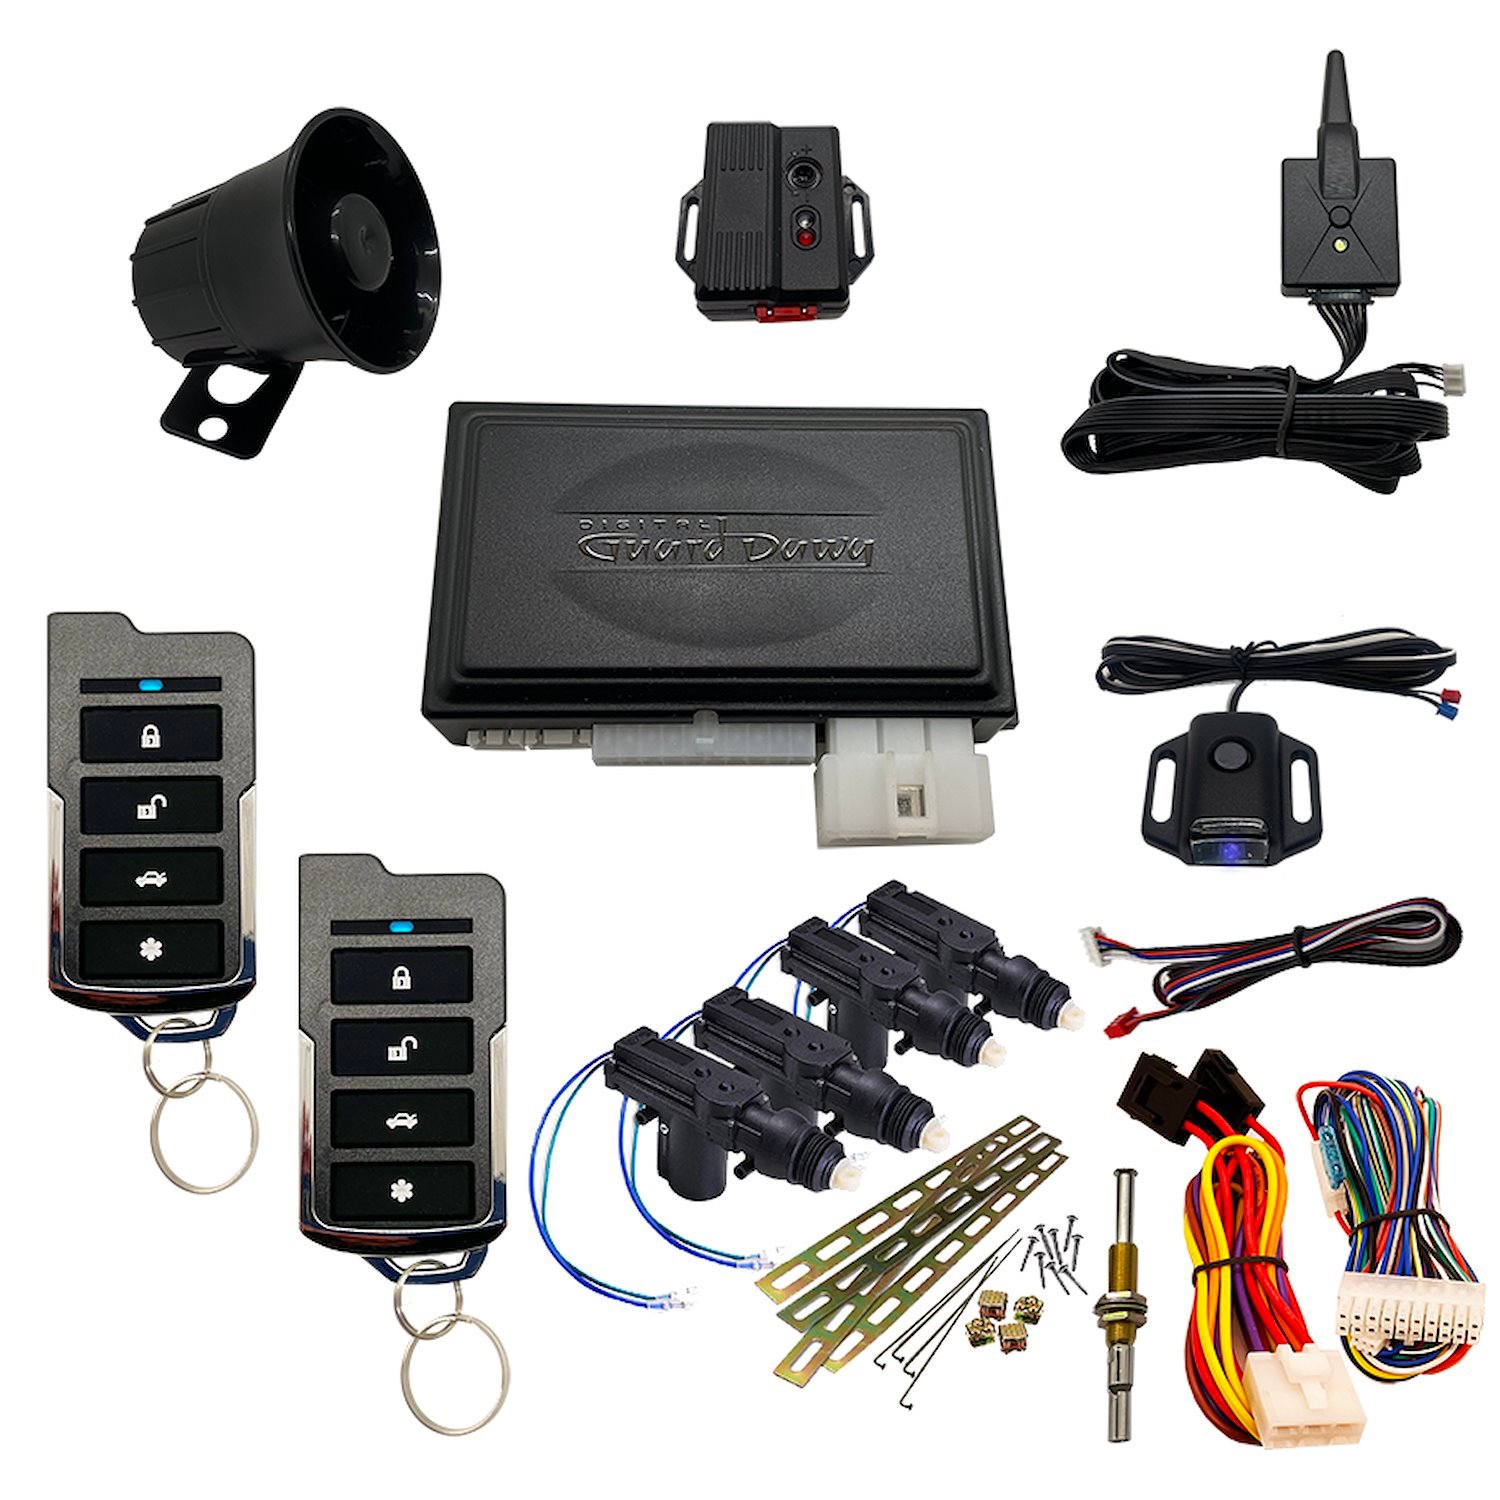 DGD-KY-ALM-RS1-4A Keyless Entry, Alarm System, and Remote Start, 1-Way, w/4-Door Actuator Kit